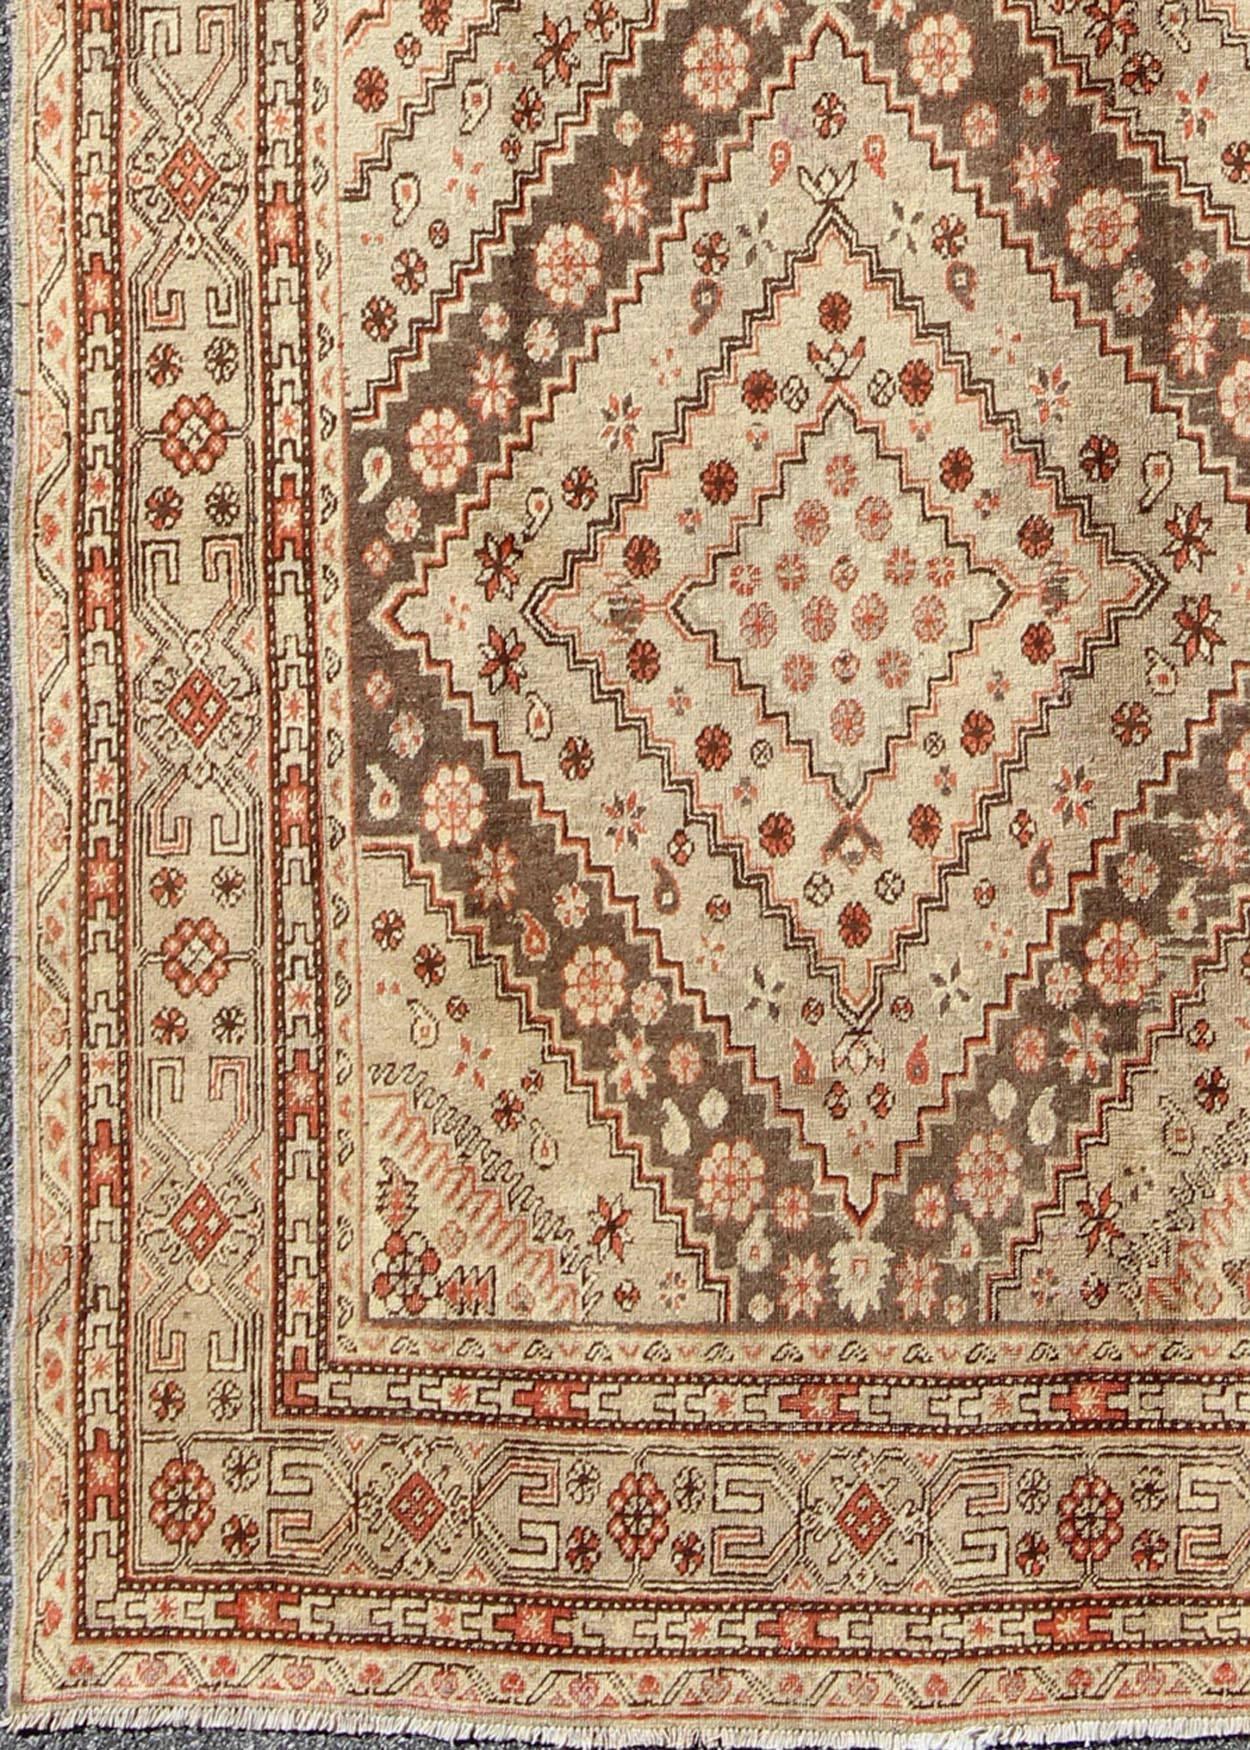 Early 20th century antique Khotan rug with paired diamond medallions, rug mp-39e, country of origin / type: Turkey / Khotan, circa 1920

This delicately rendered antique Khotan rug was handcrafted in Turkestan during the early part of 20th century